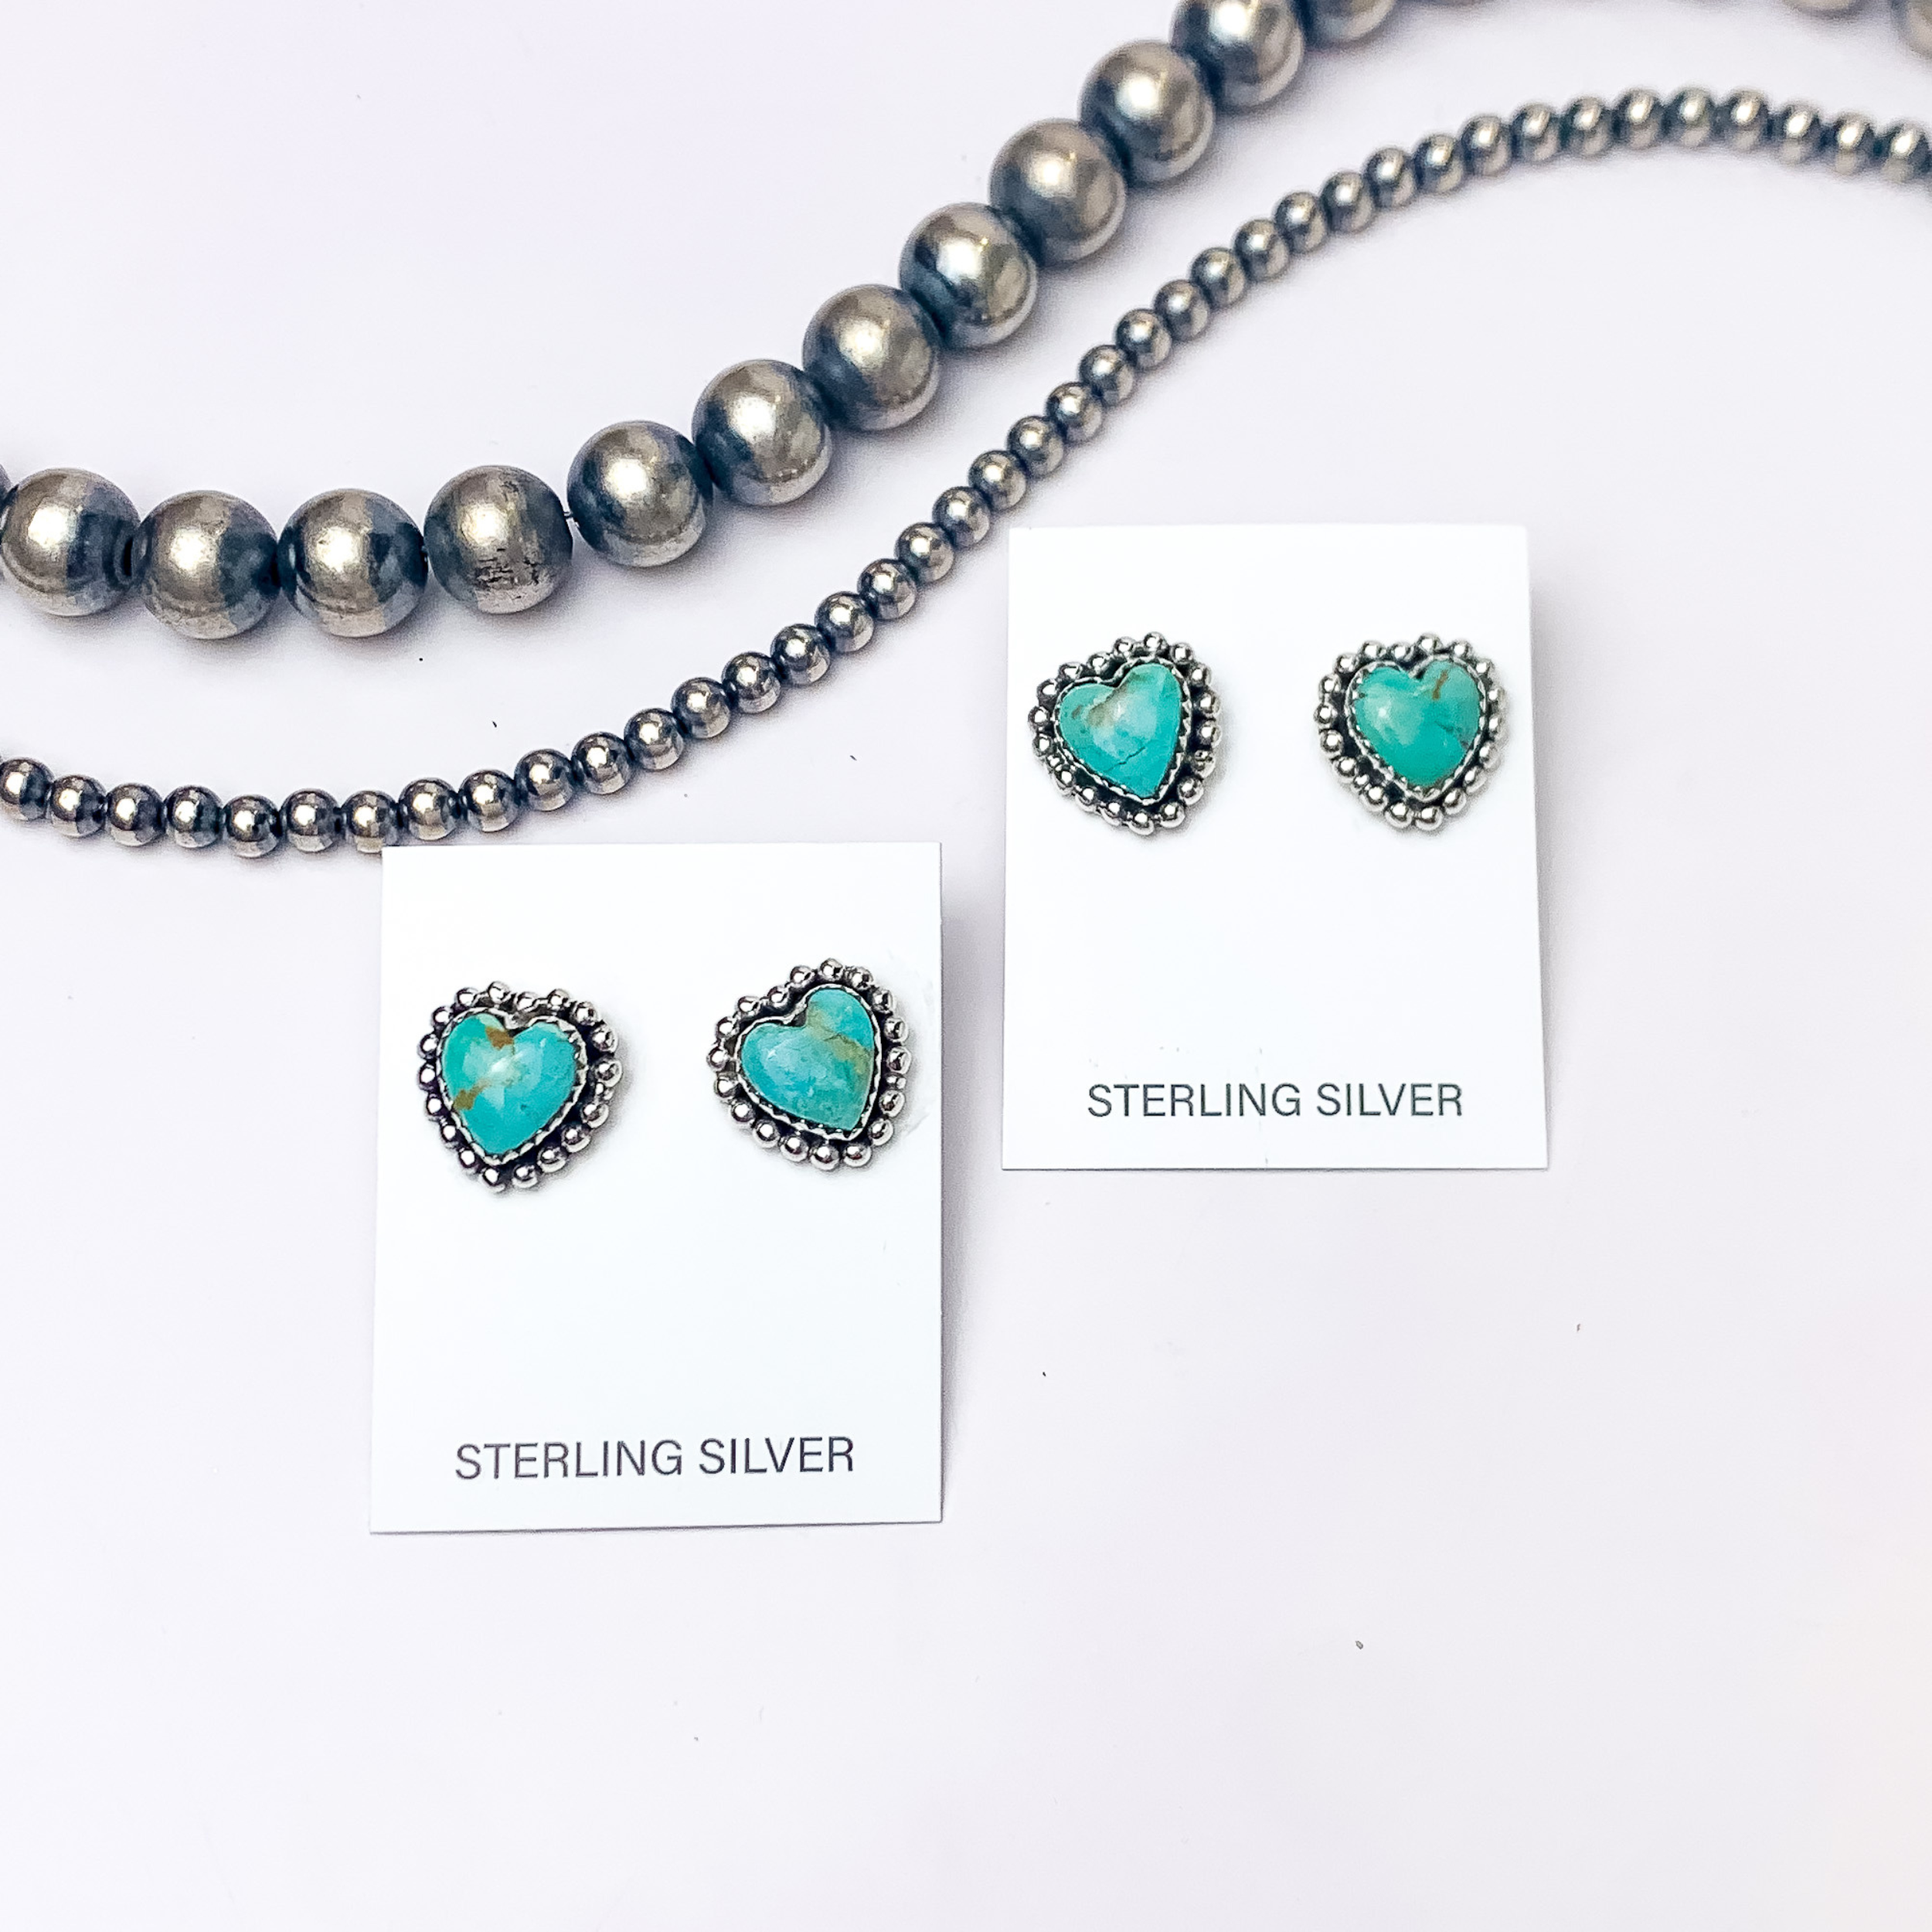 In the picture are handmade sterling silver heart shaped stud earrings with kingman turquoise remix stones with a white background